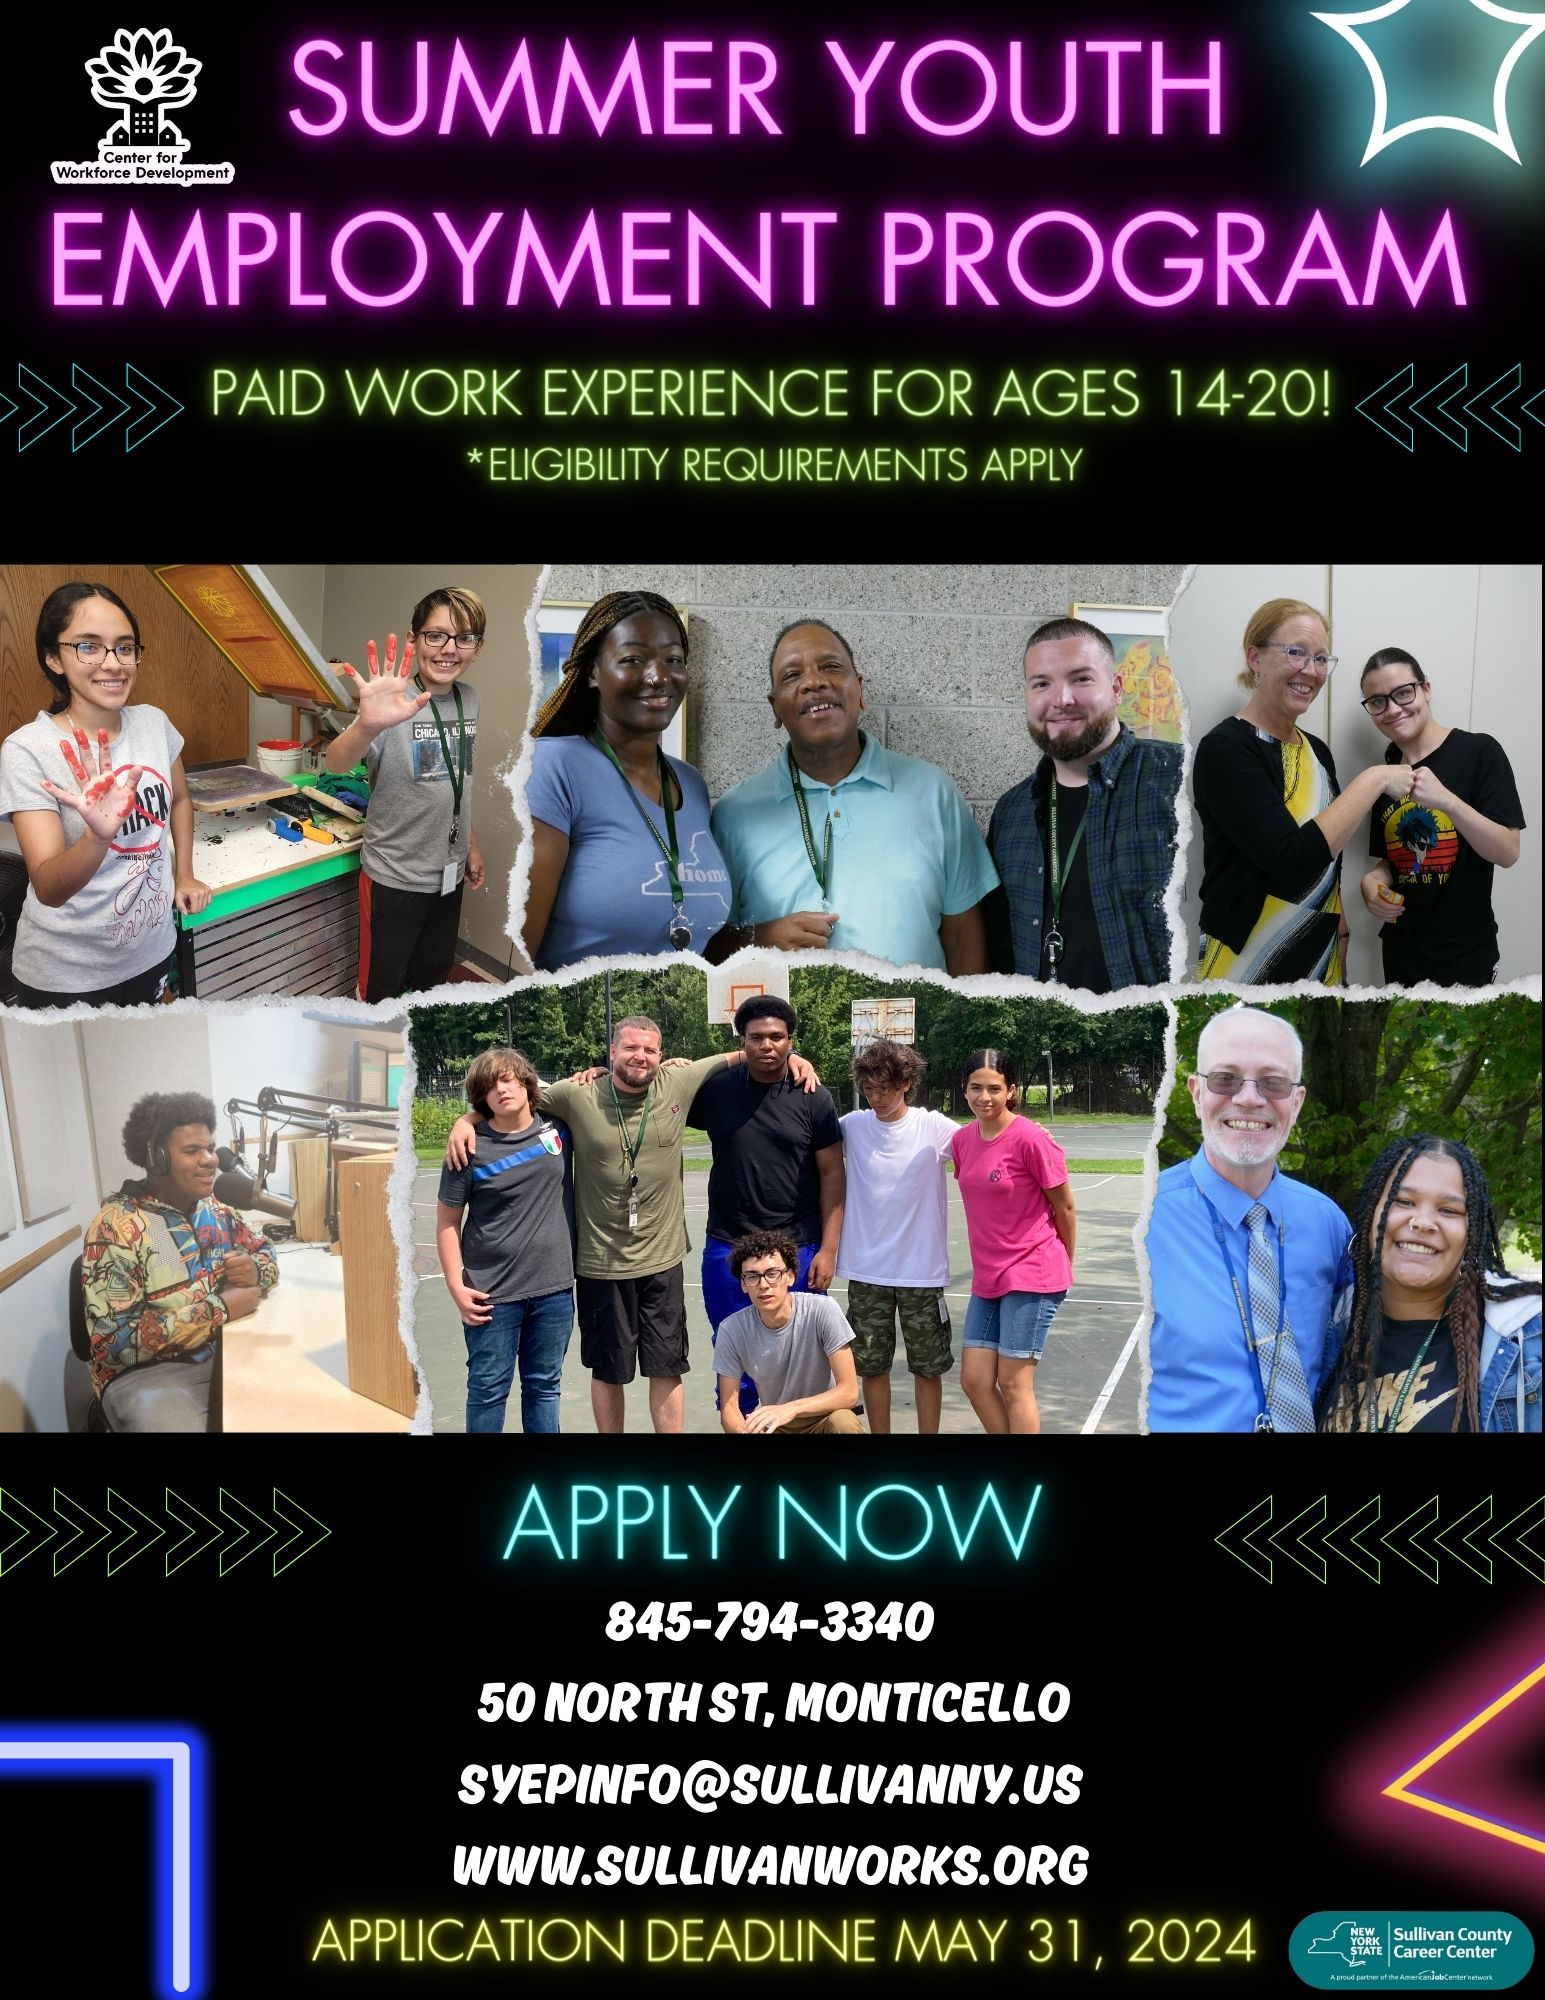 Summer youth employment program applications now accepted! Youth ages 14-20; visit www.sullivanworks.org 